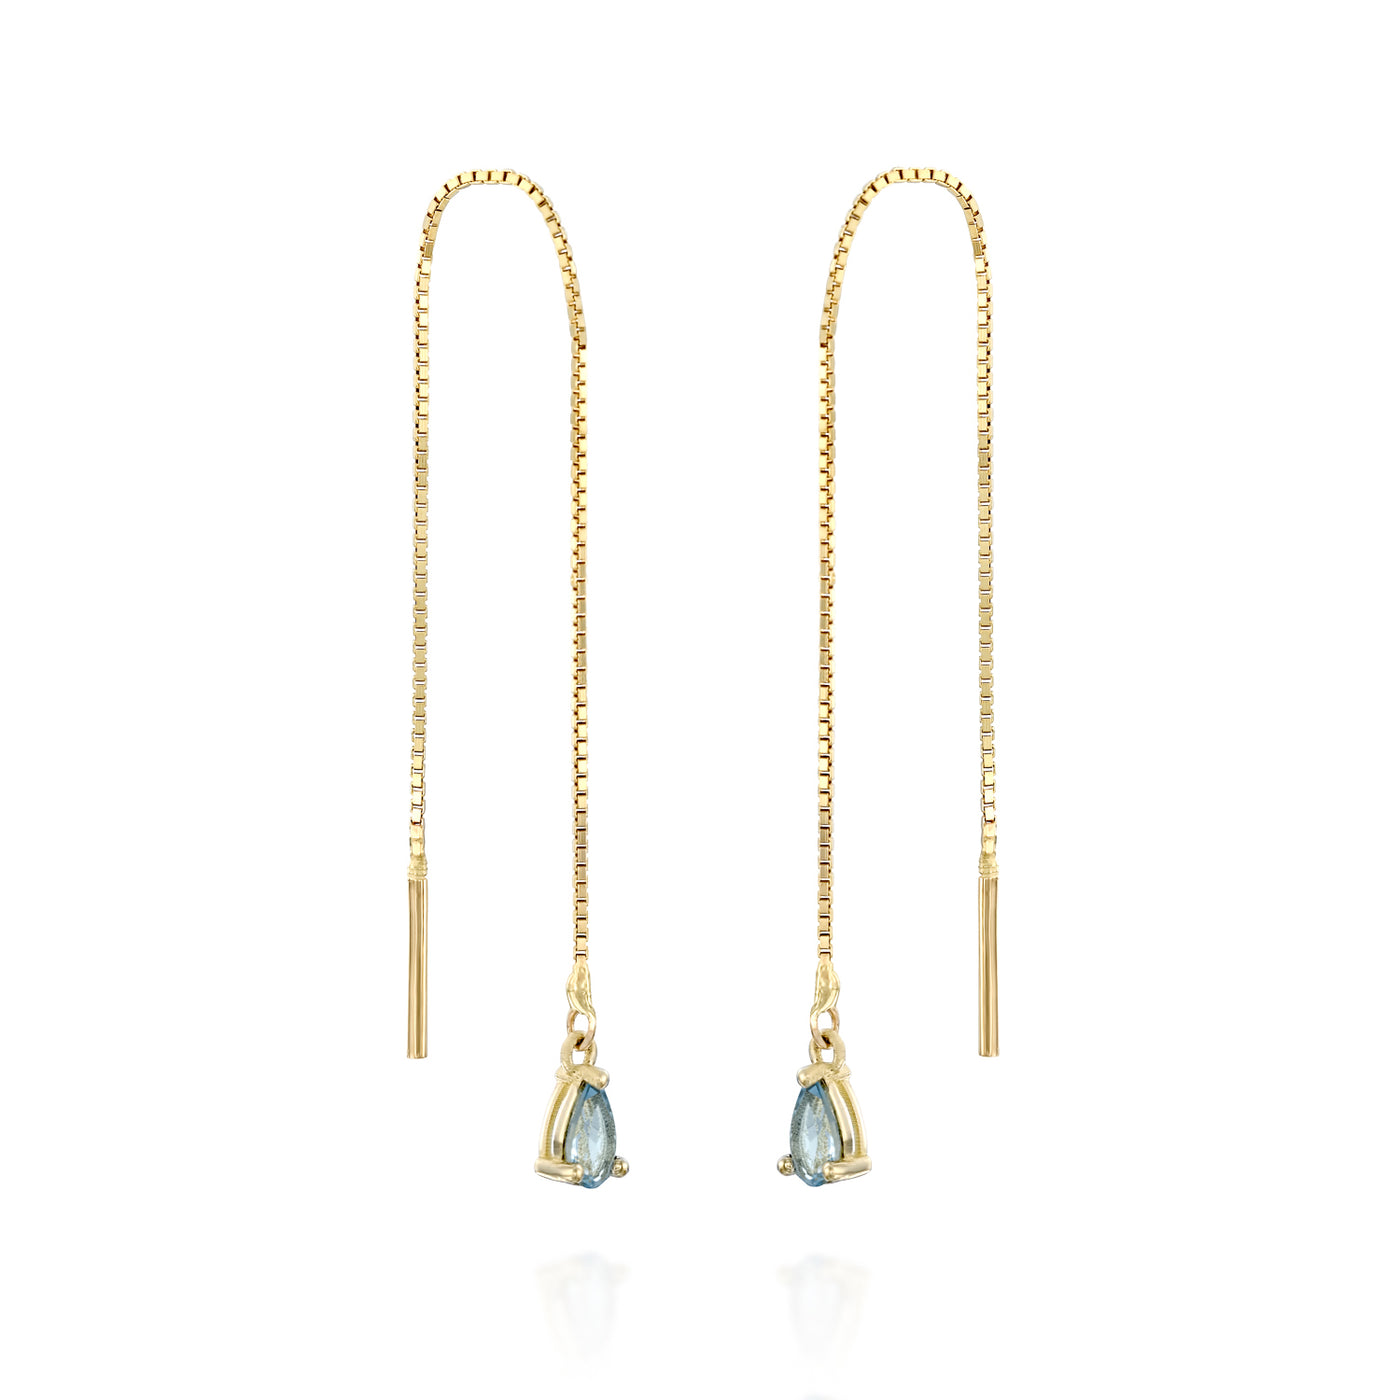 These dainty 14K solid gold wedding earrings are the perfect Aquamarine blue chain dangle threader earrings.